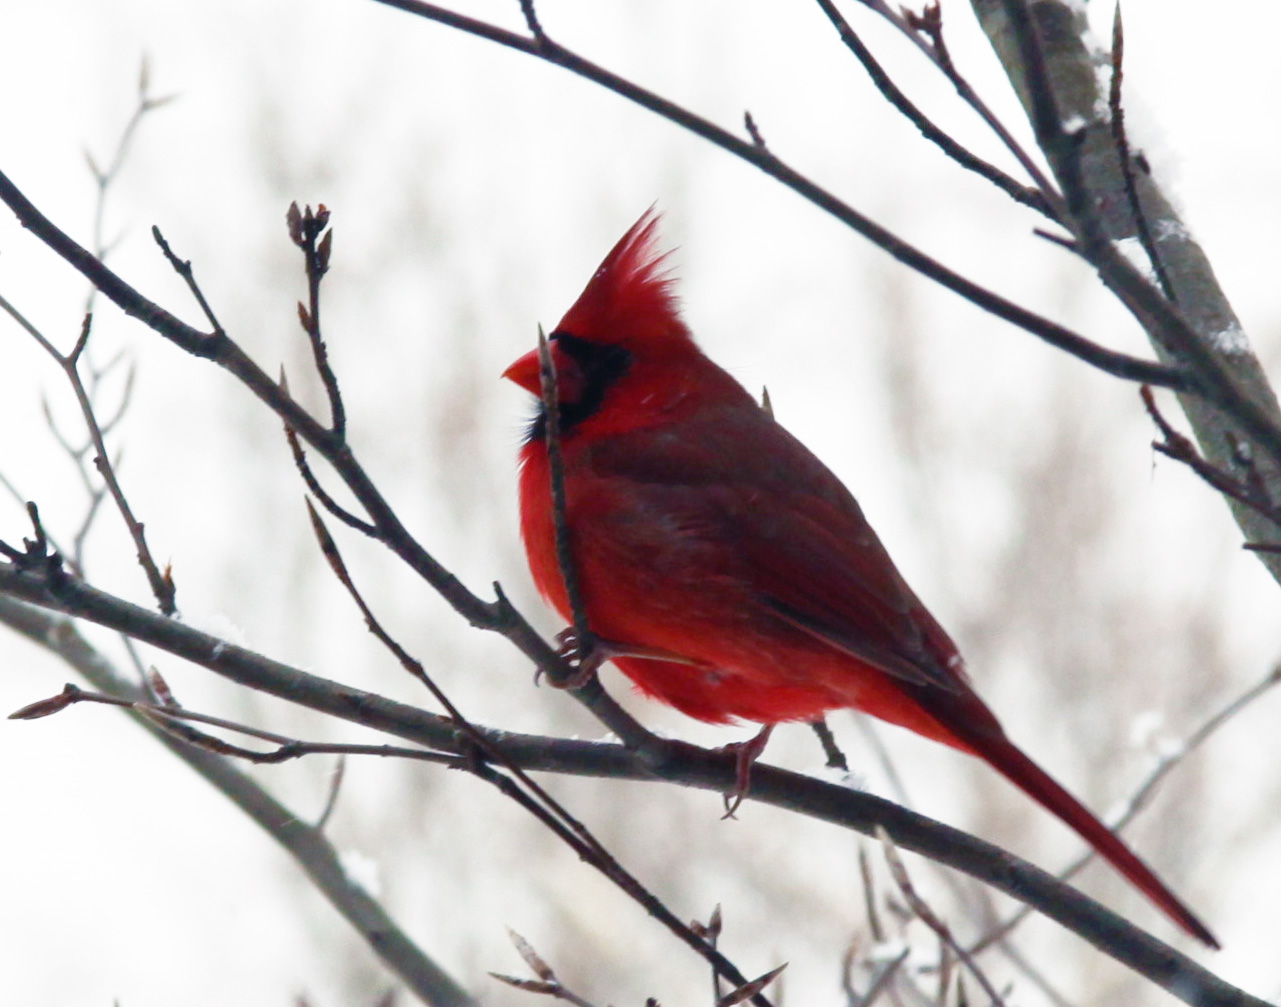 Click to Enlarge - Cardinal - Crop from 100% image